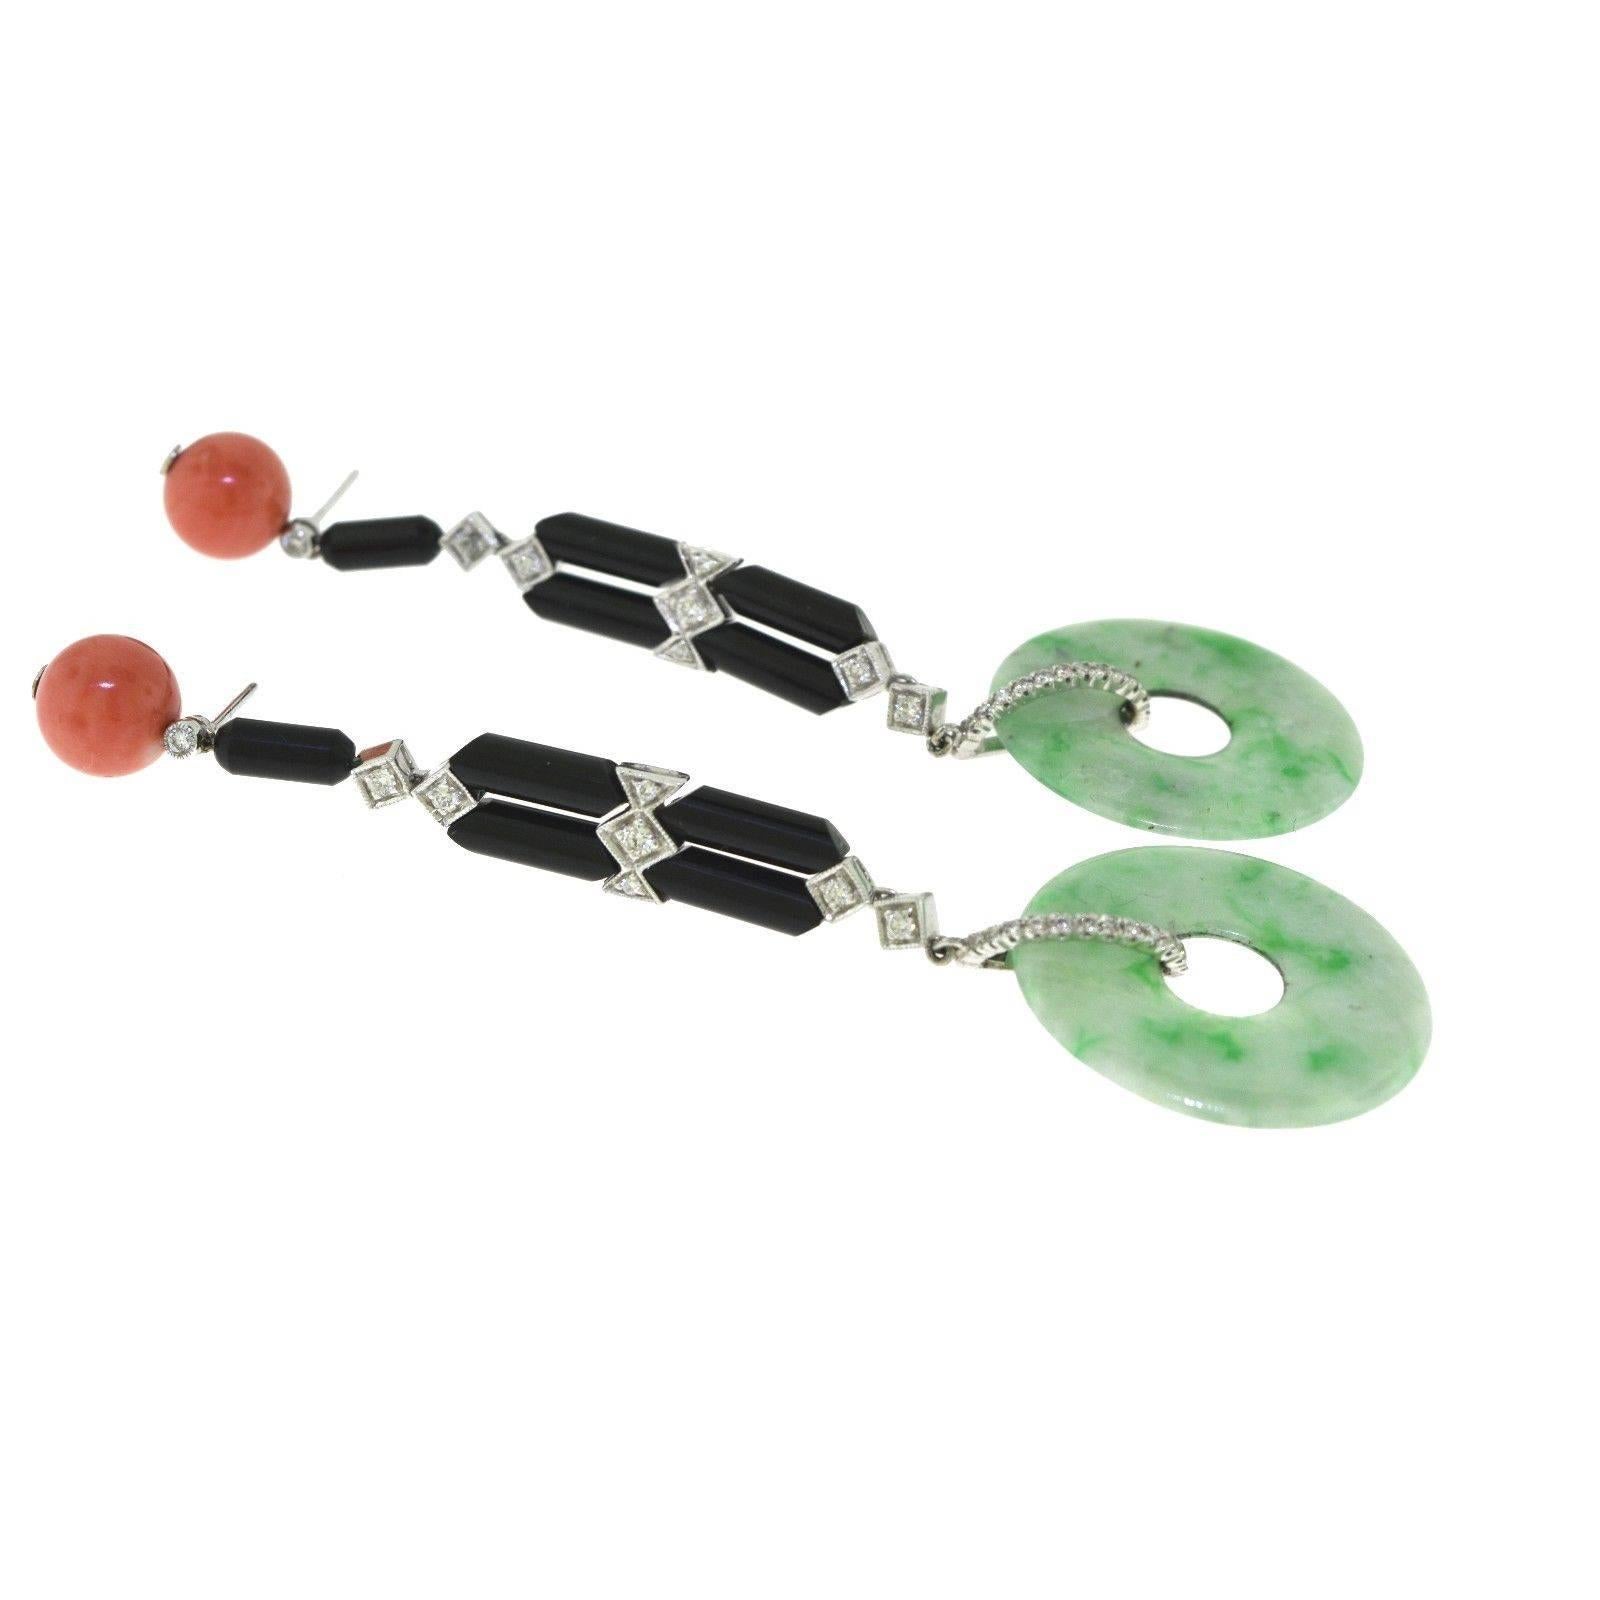 Magnificent and one-of-a-kind, these stunning coral, diamond, onyx, and jade disc drop earrings fall beautifully from your ears. They made the perfect gift for that special someone. Contact us for more information.

Item Specifications:
Metal: White